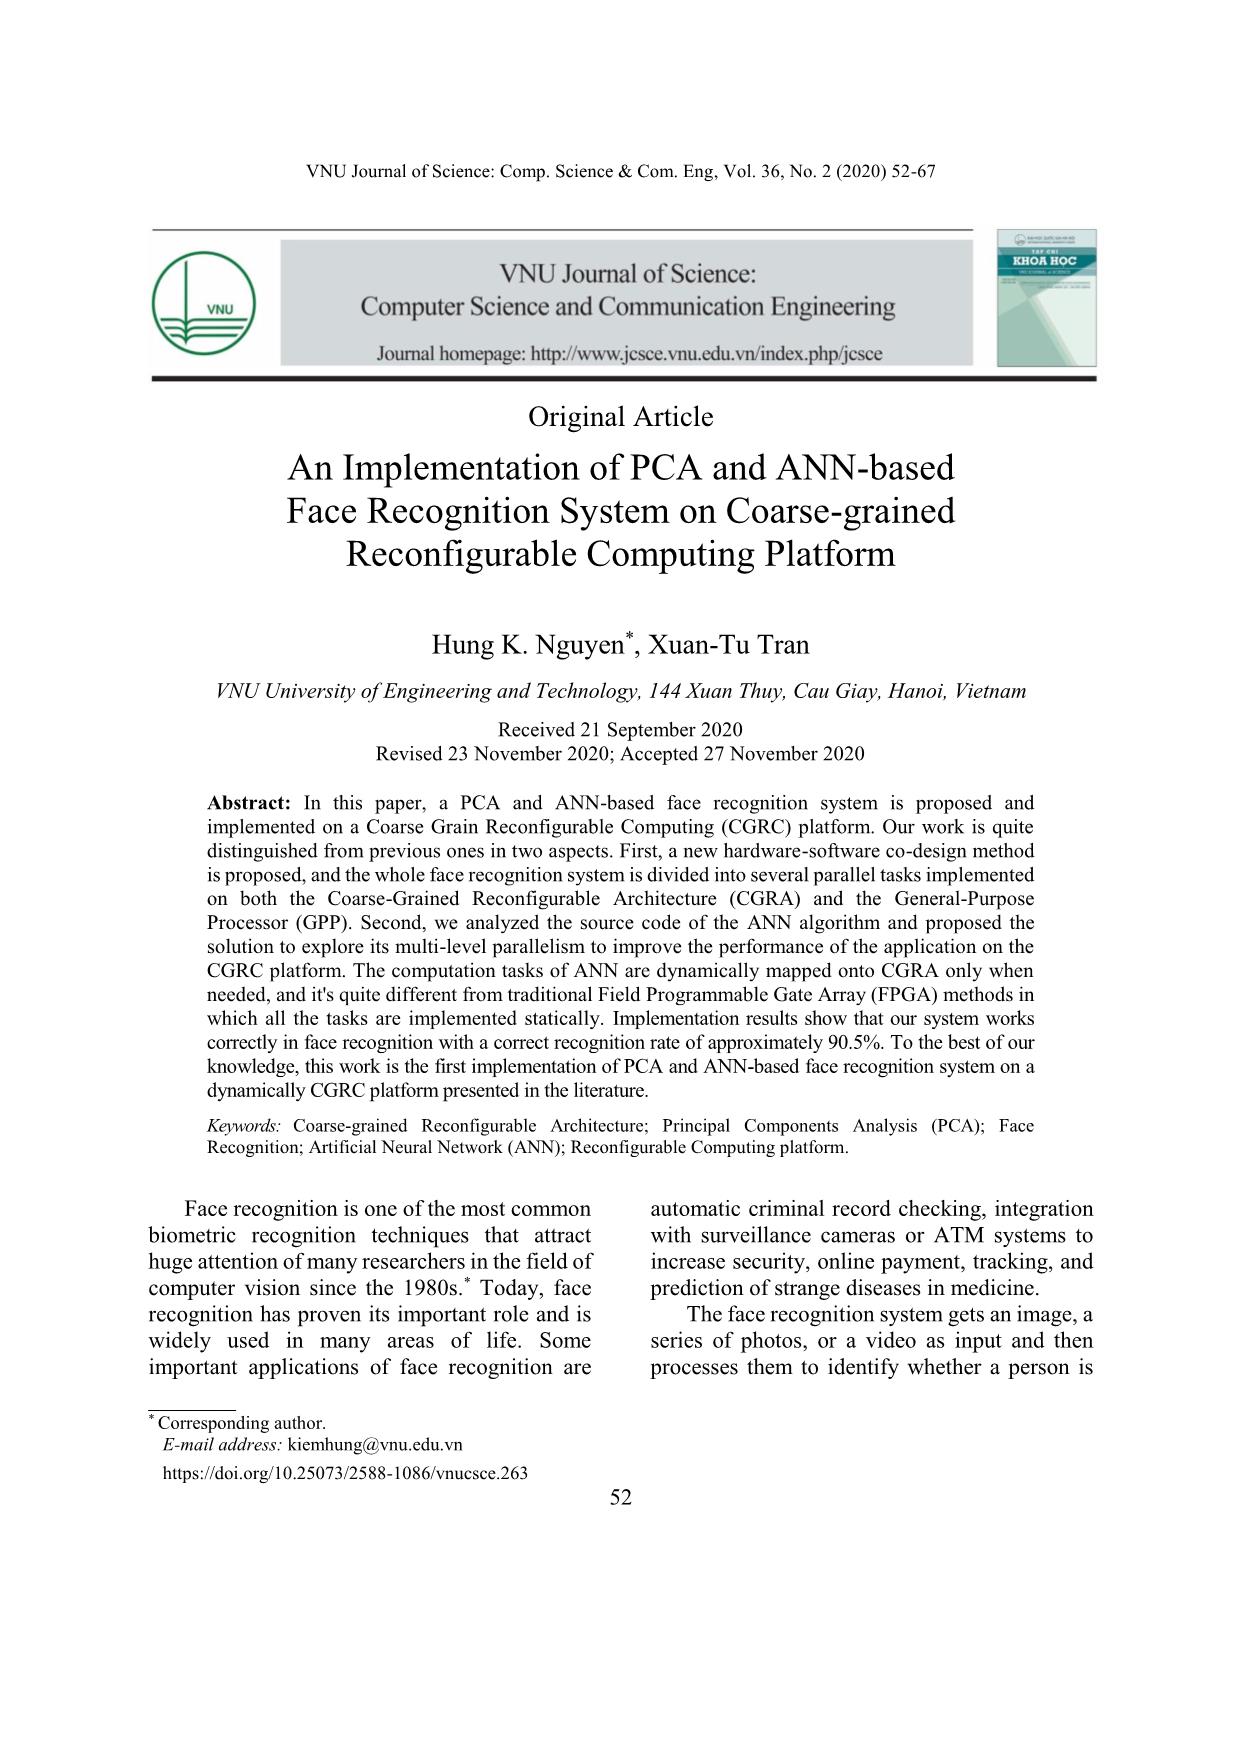 An implementation of PCA and ann - based face recognition system on coarse - grained reconfigurable computing platform trang 1